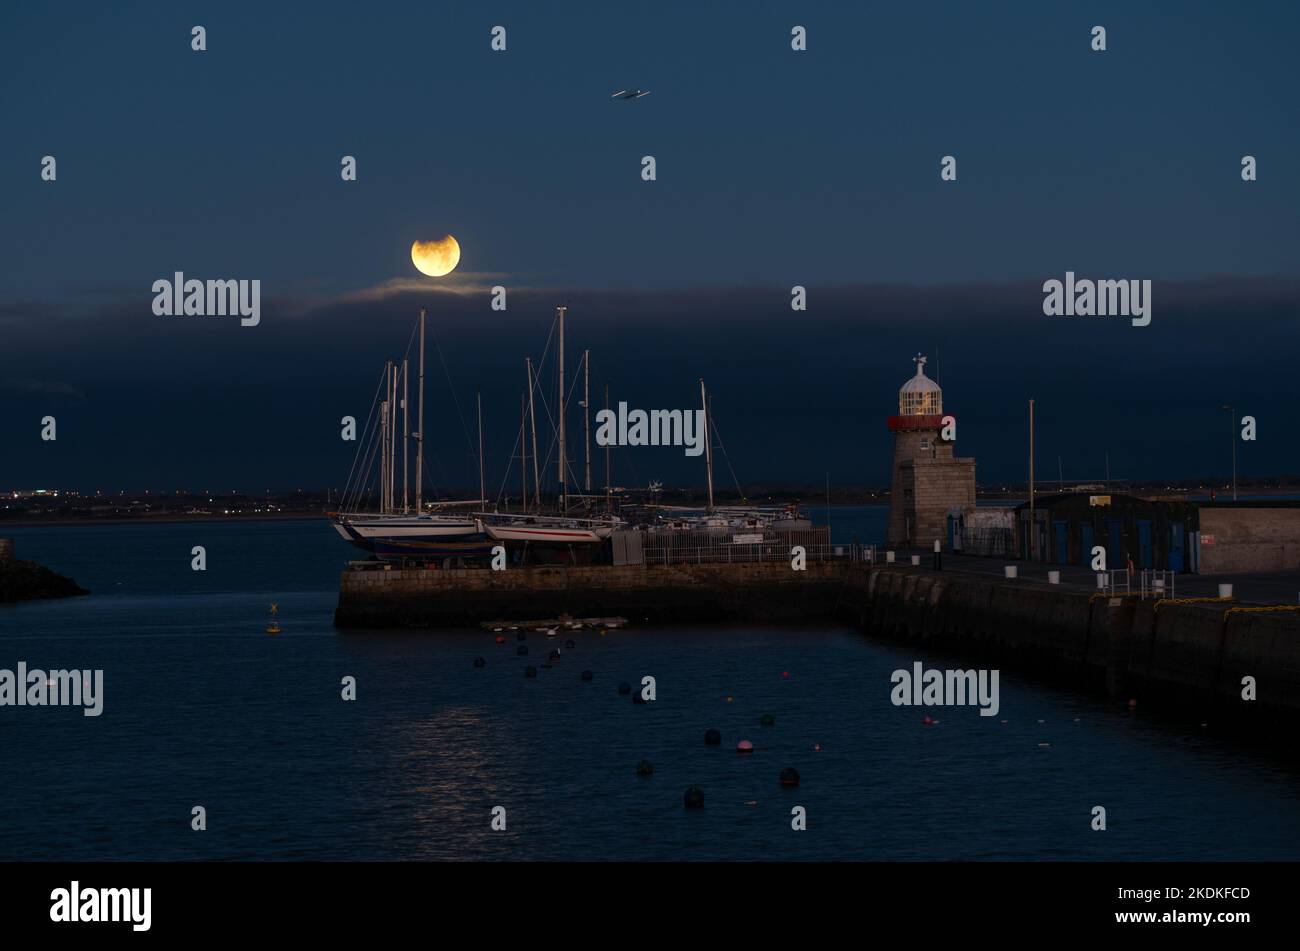 The November 2021 partial lunar eclipse setting at Howth Harbour. Stock Photo